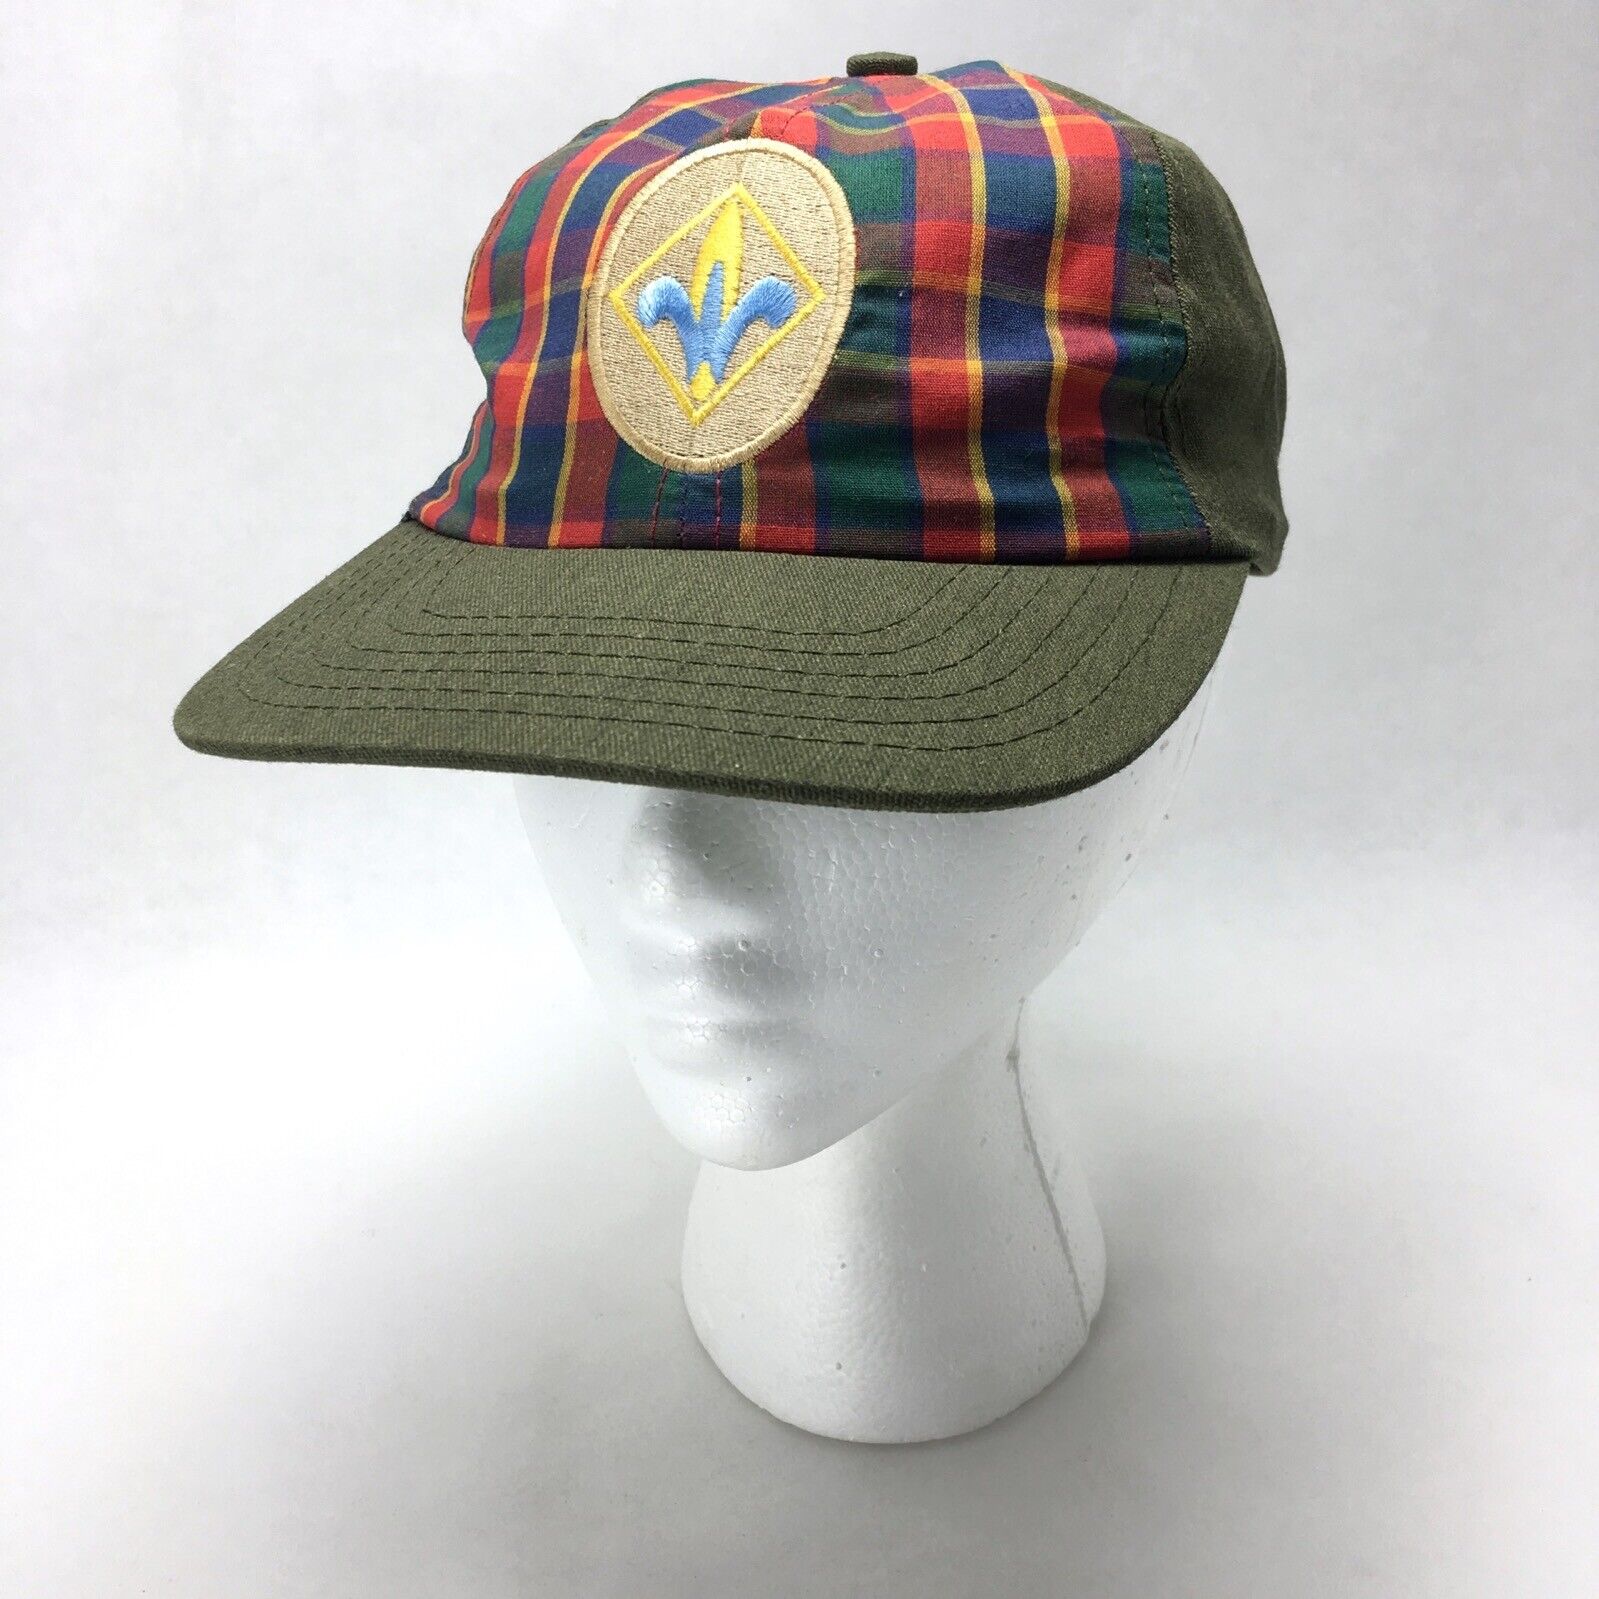 Official BSA Twill Webelos Cub Scout Adjustable Twill Cap Hat Plaid Youth S/M